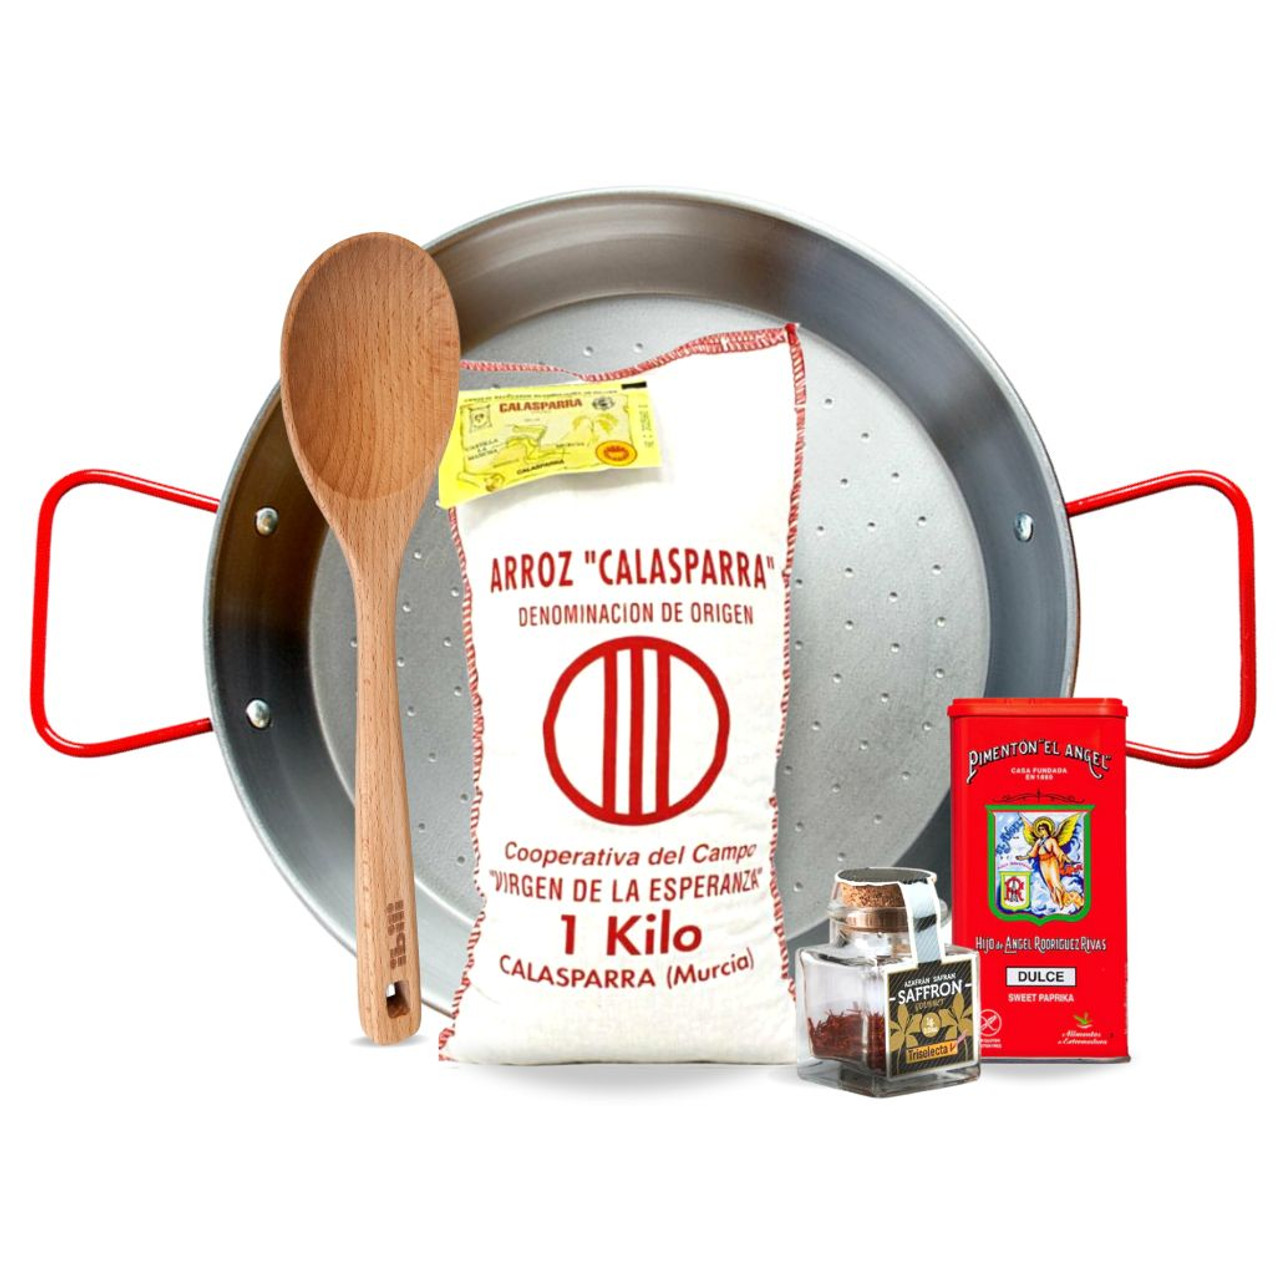 Paella Book Gift Set - Spanish Food and Paella Pans from